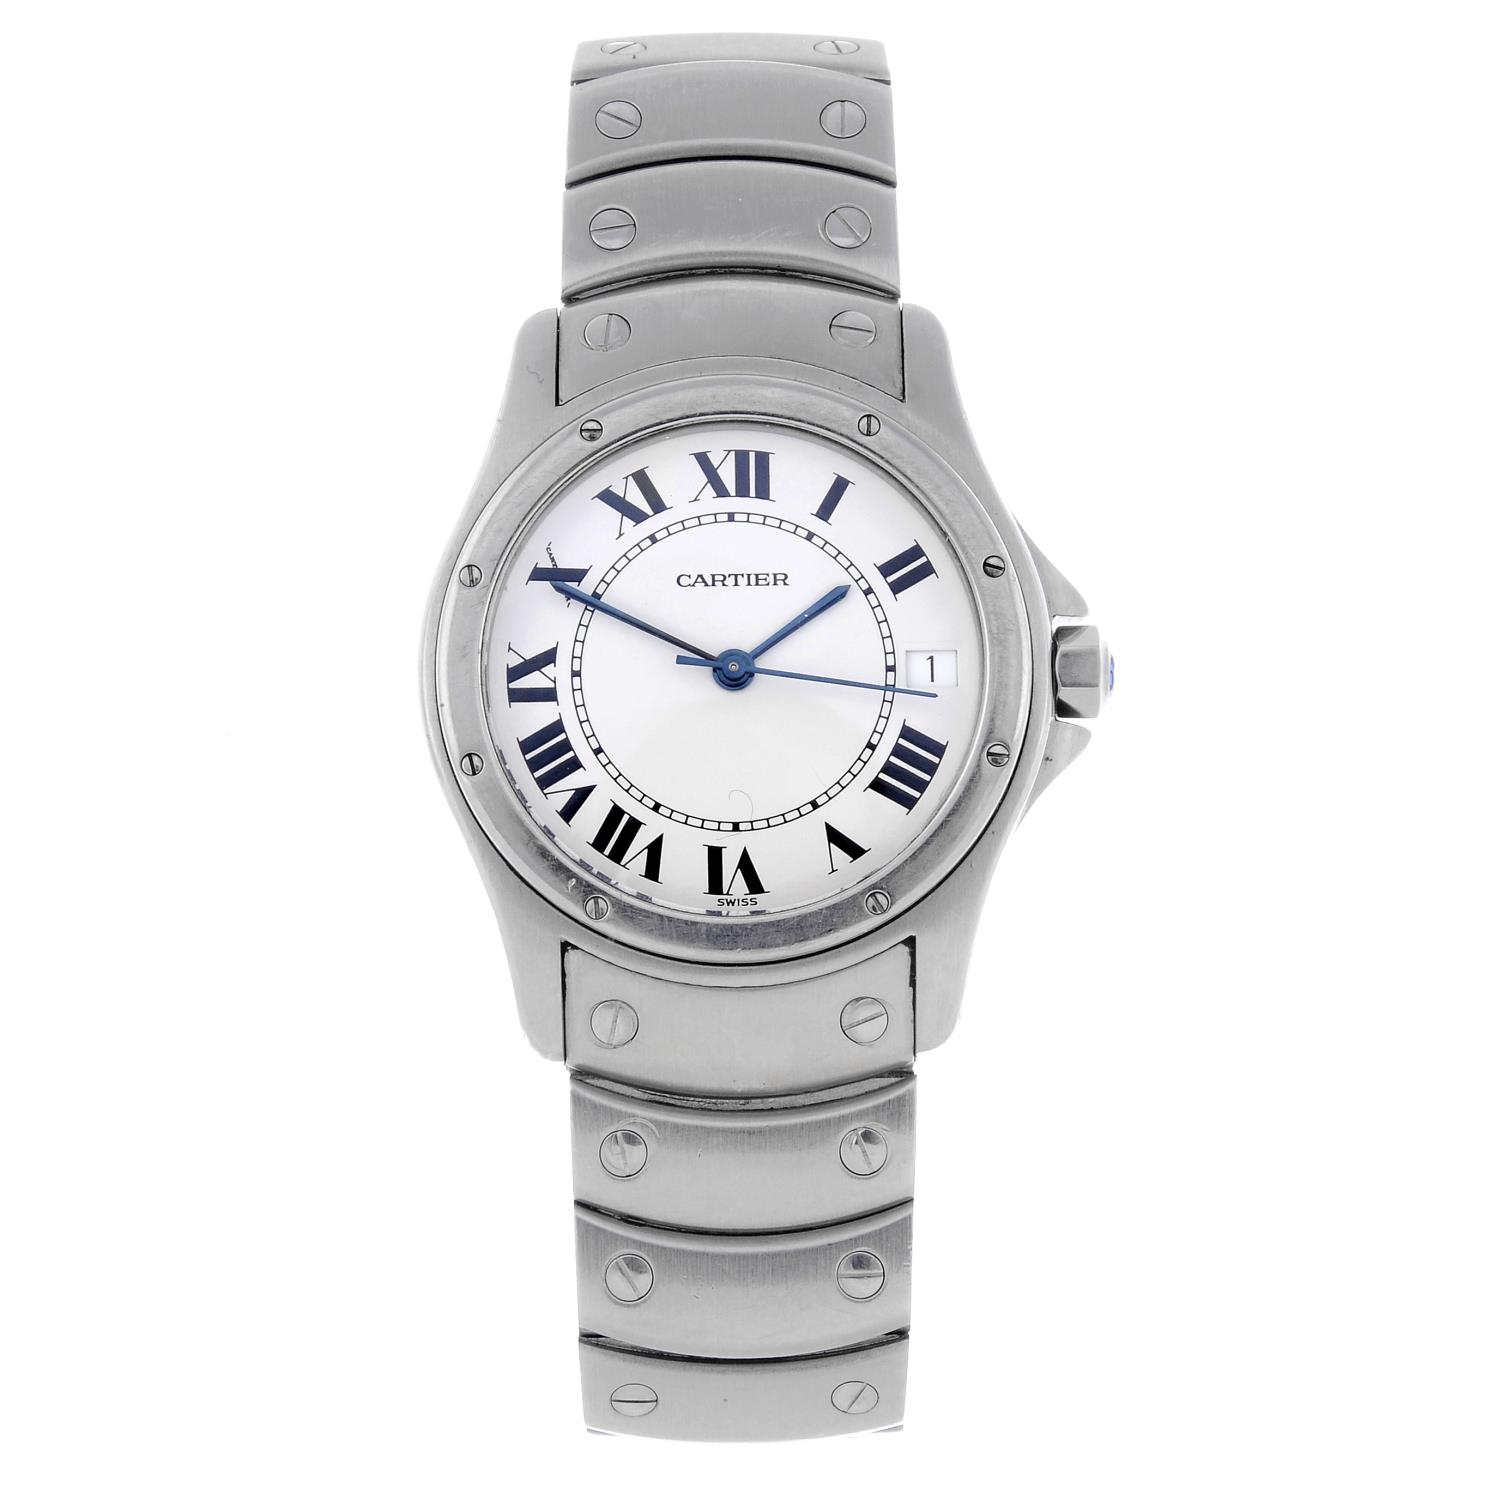 CARTIER - a Cougar bracelet watch. Stainless steel case with engraved case back. Reference 1920,